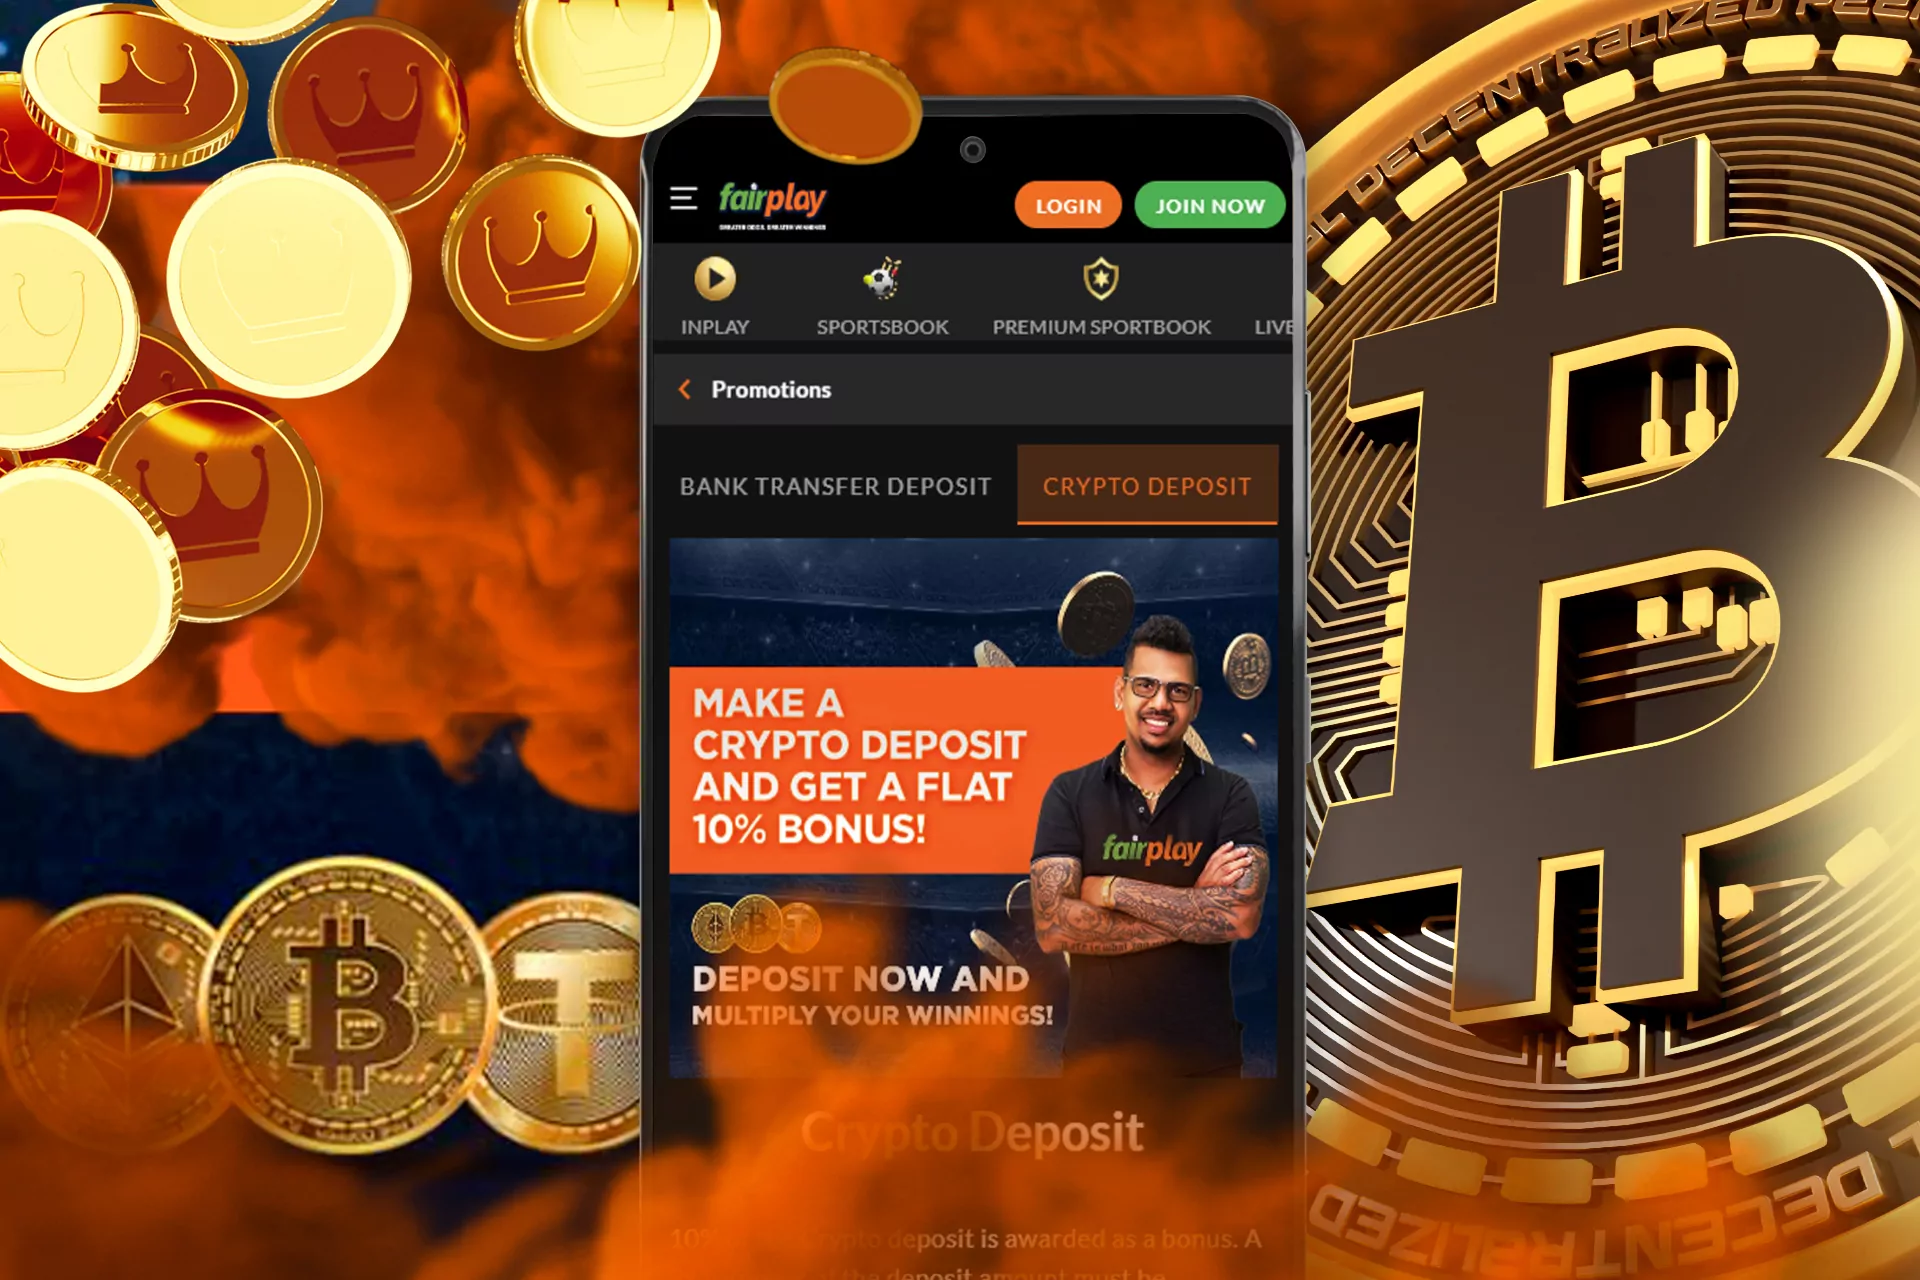 In the Fairplay app, you can get a bonus from depositing with cryptocurrencies.